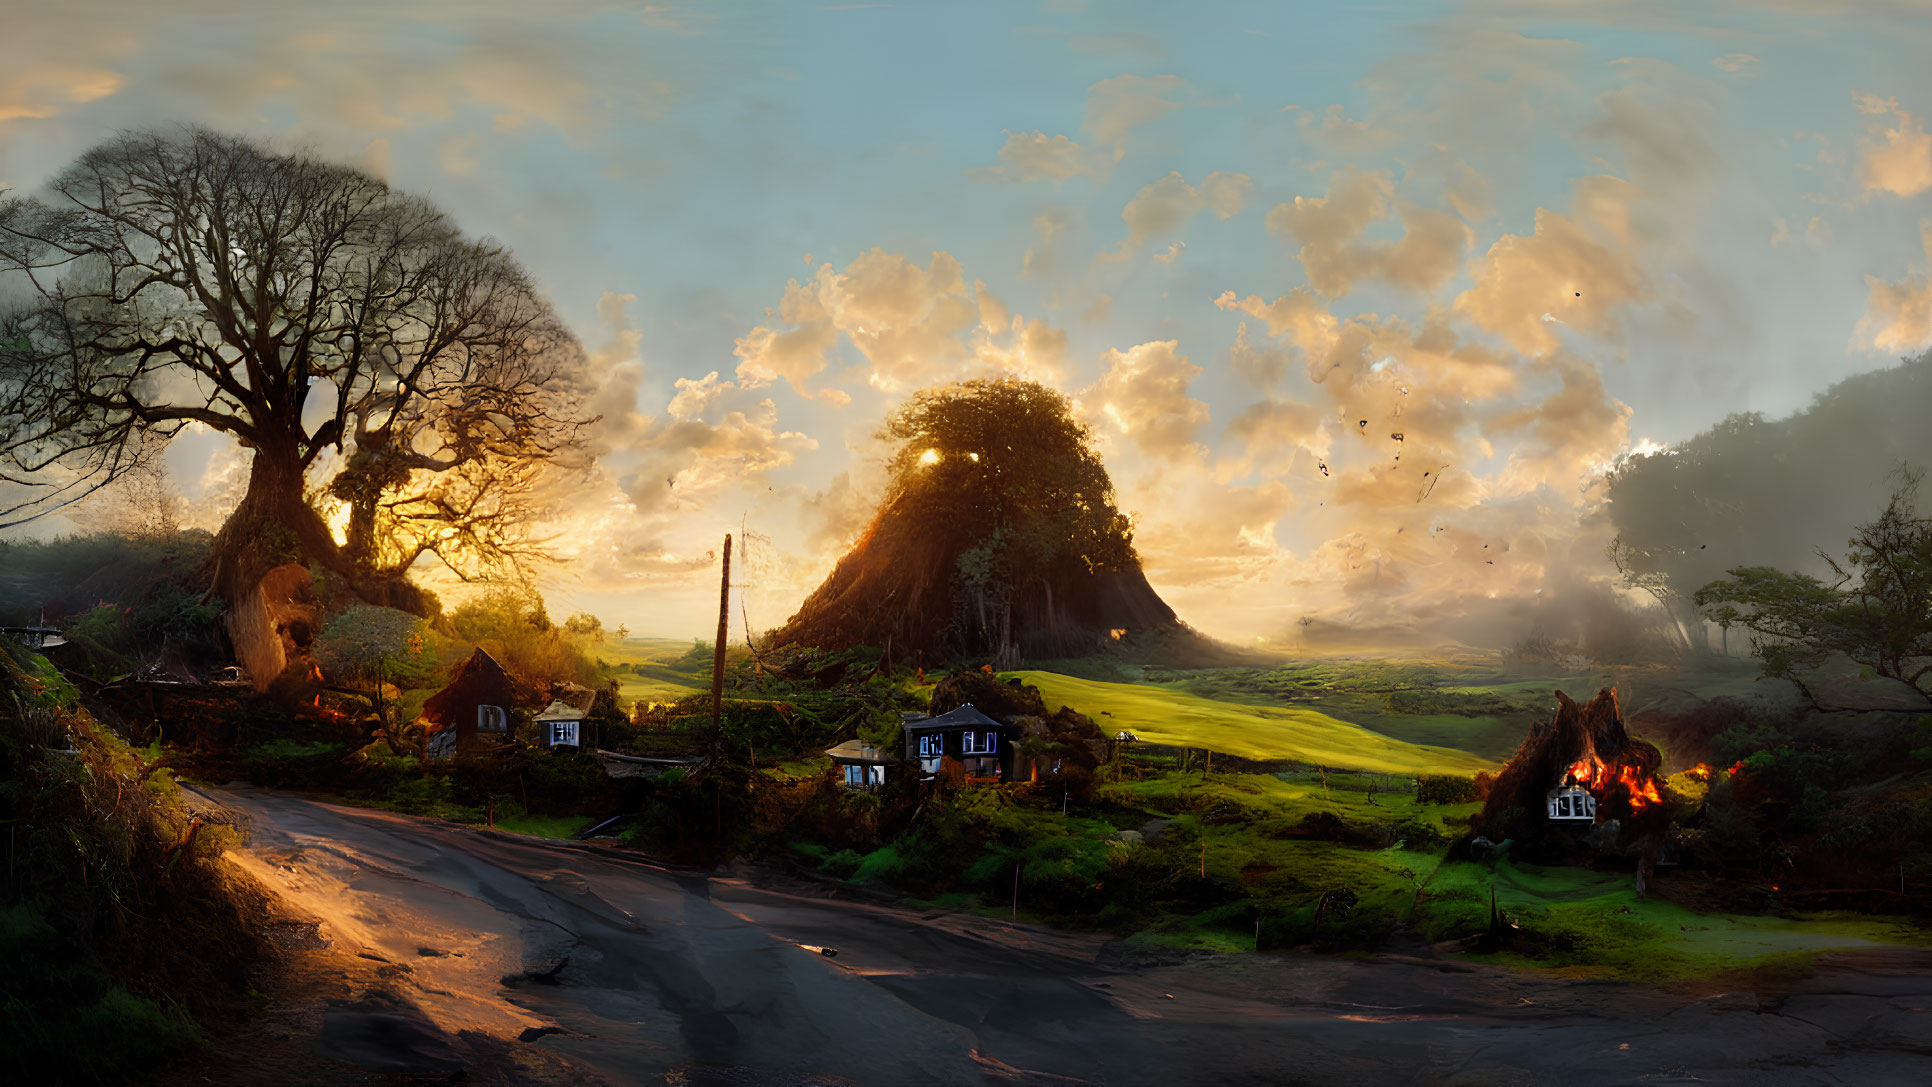 Scenic countryside sunset with winding road and quaint houses